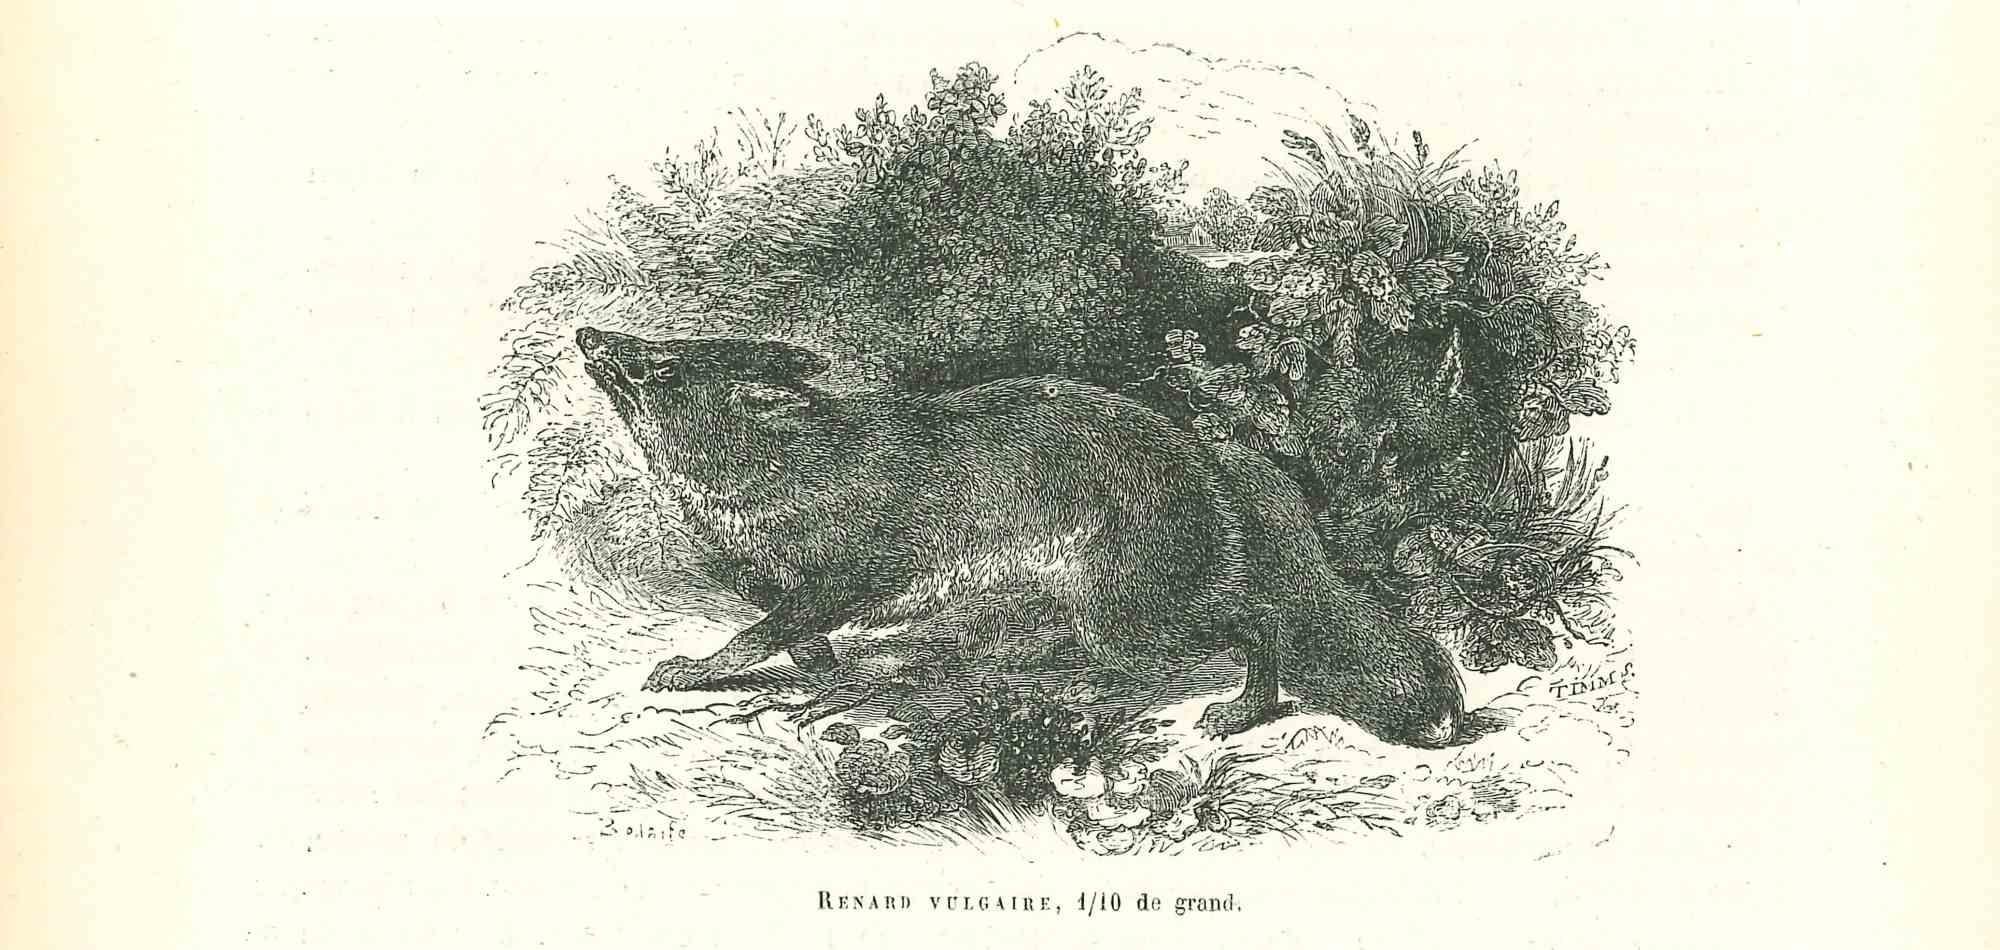 The Wolf is an original lithograph on ivory-colored paper, realized by Paul Gervais (1816-1879). The artwork is from The Series of "Les Trois Règnes de la Nature", and was published in 1854.

Good conditions.

Titled on the lower. With the notes on